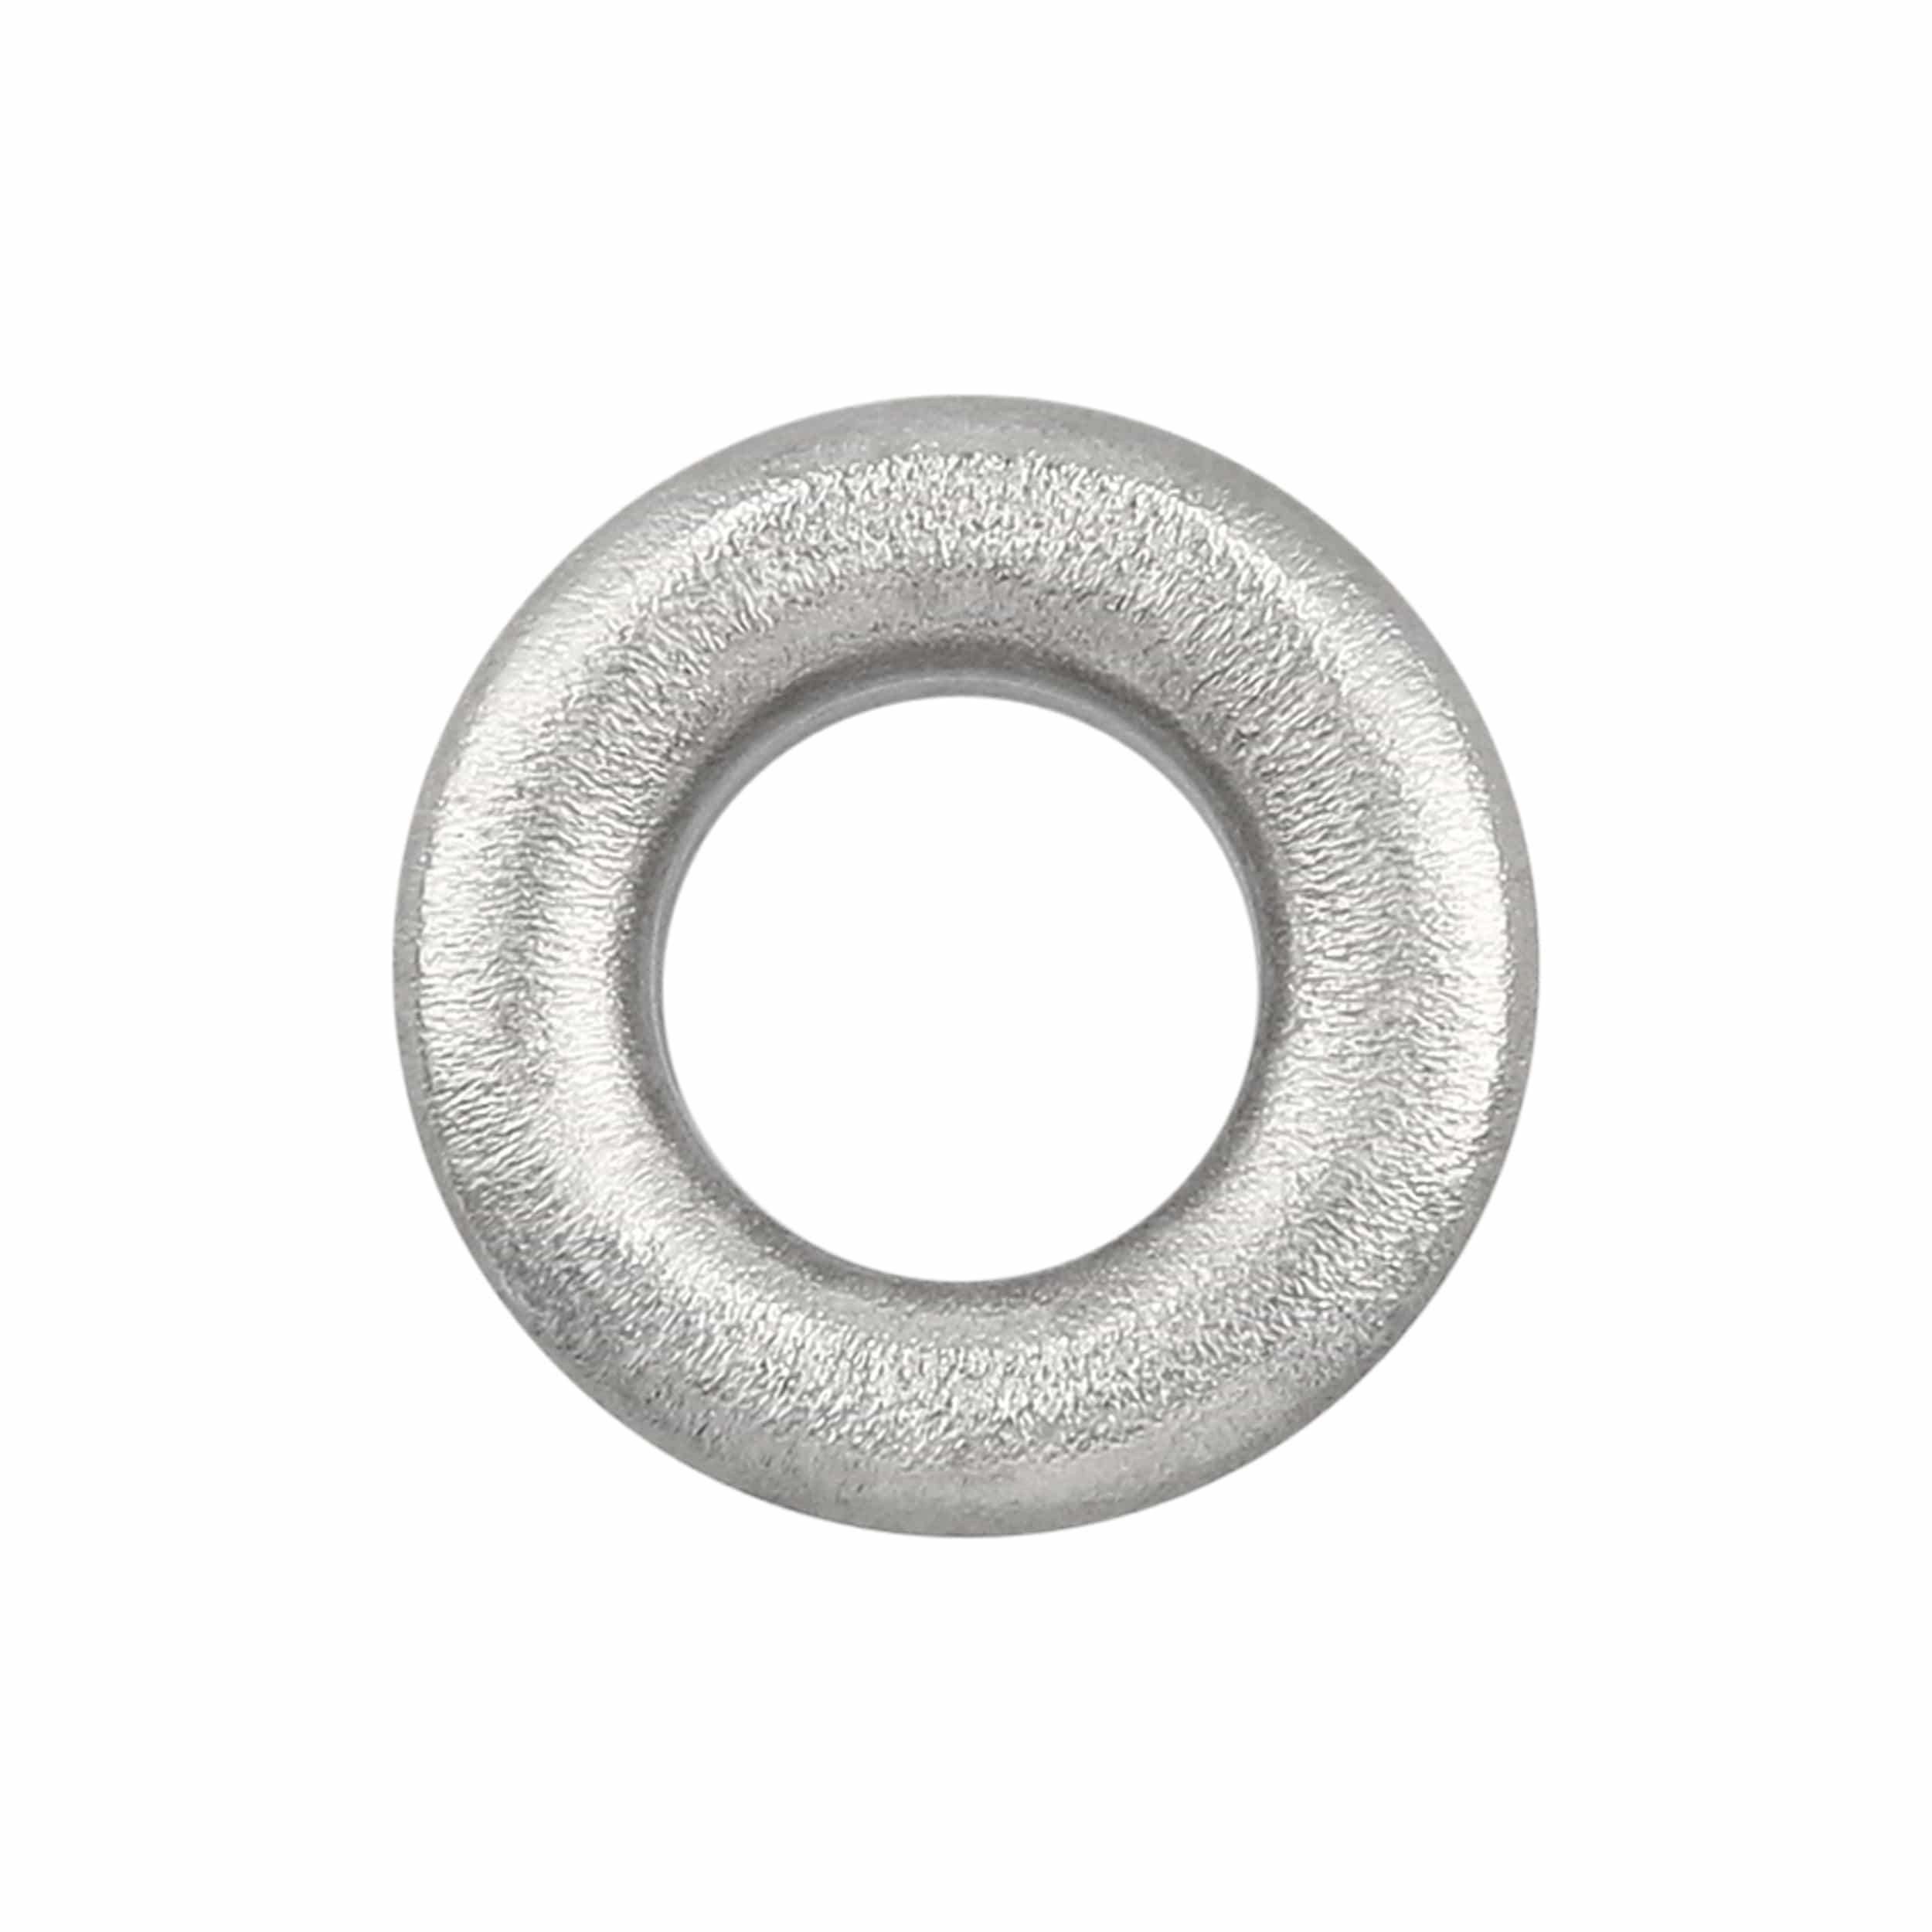 Ohio Travel Bag Fasteners 5/32" Nickel, Eyelet, Steel - 36 pk, #A-258-NP A-258-NP